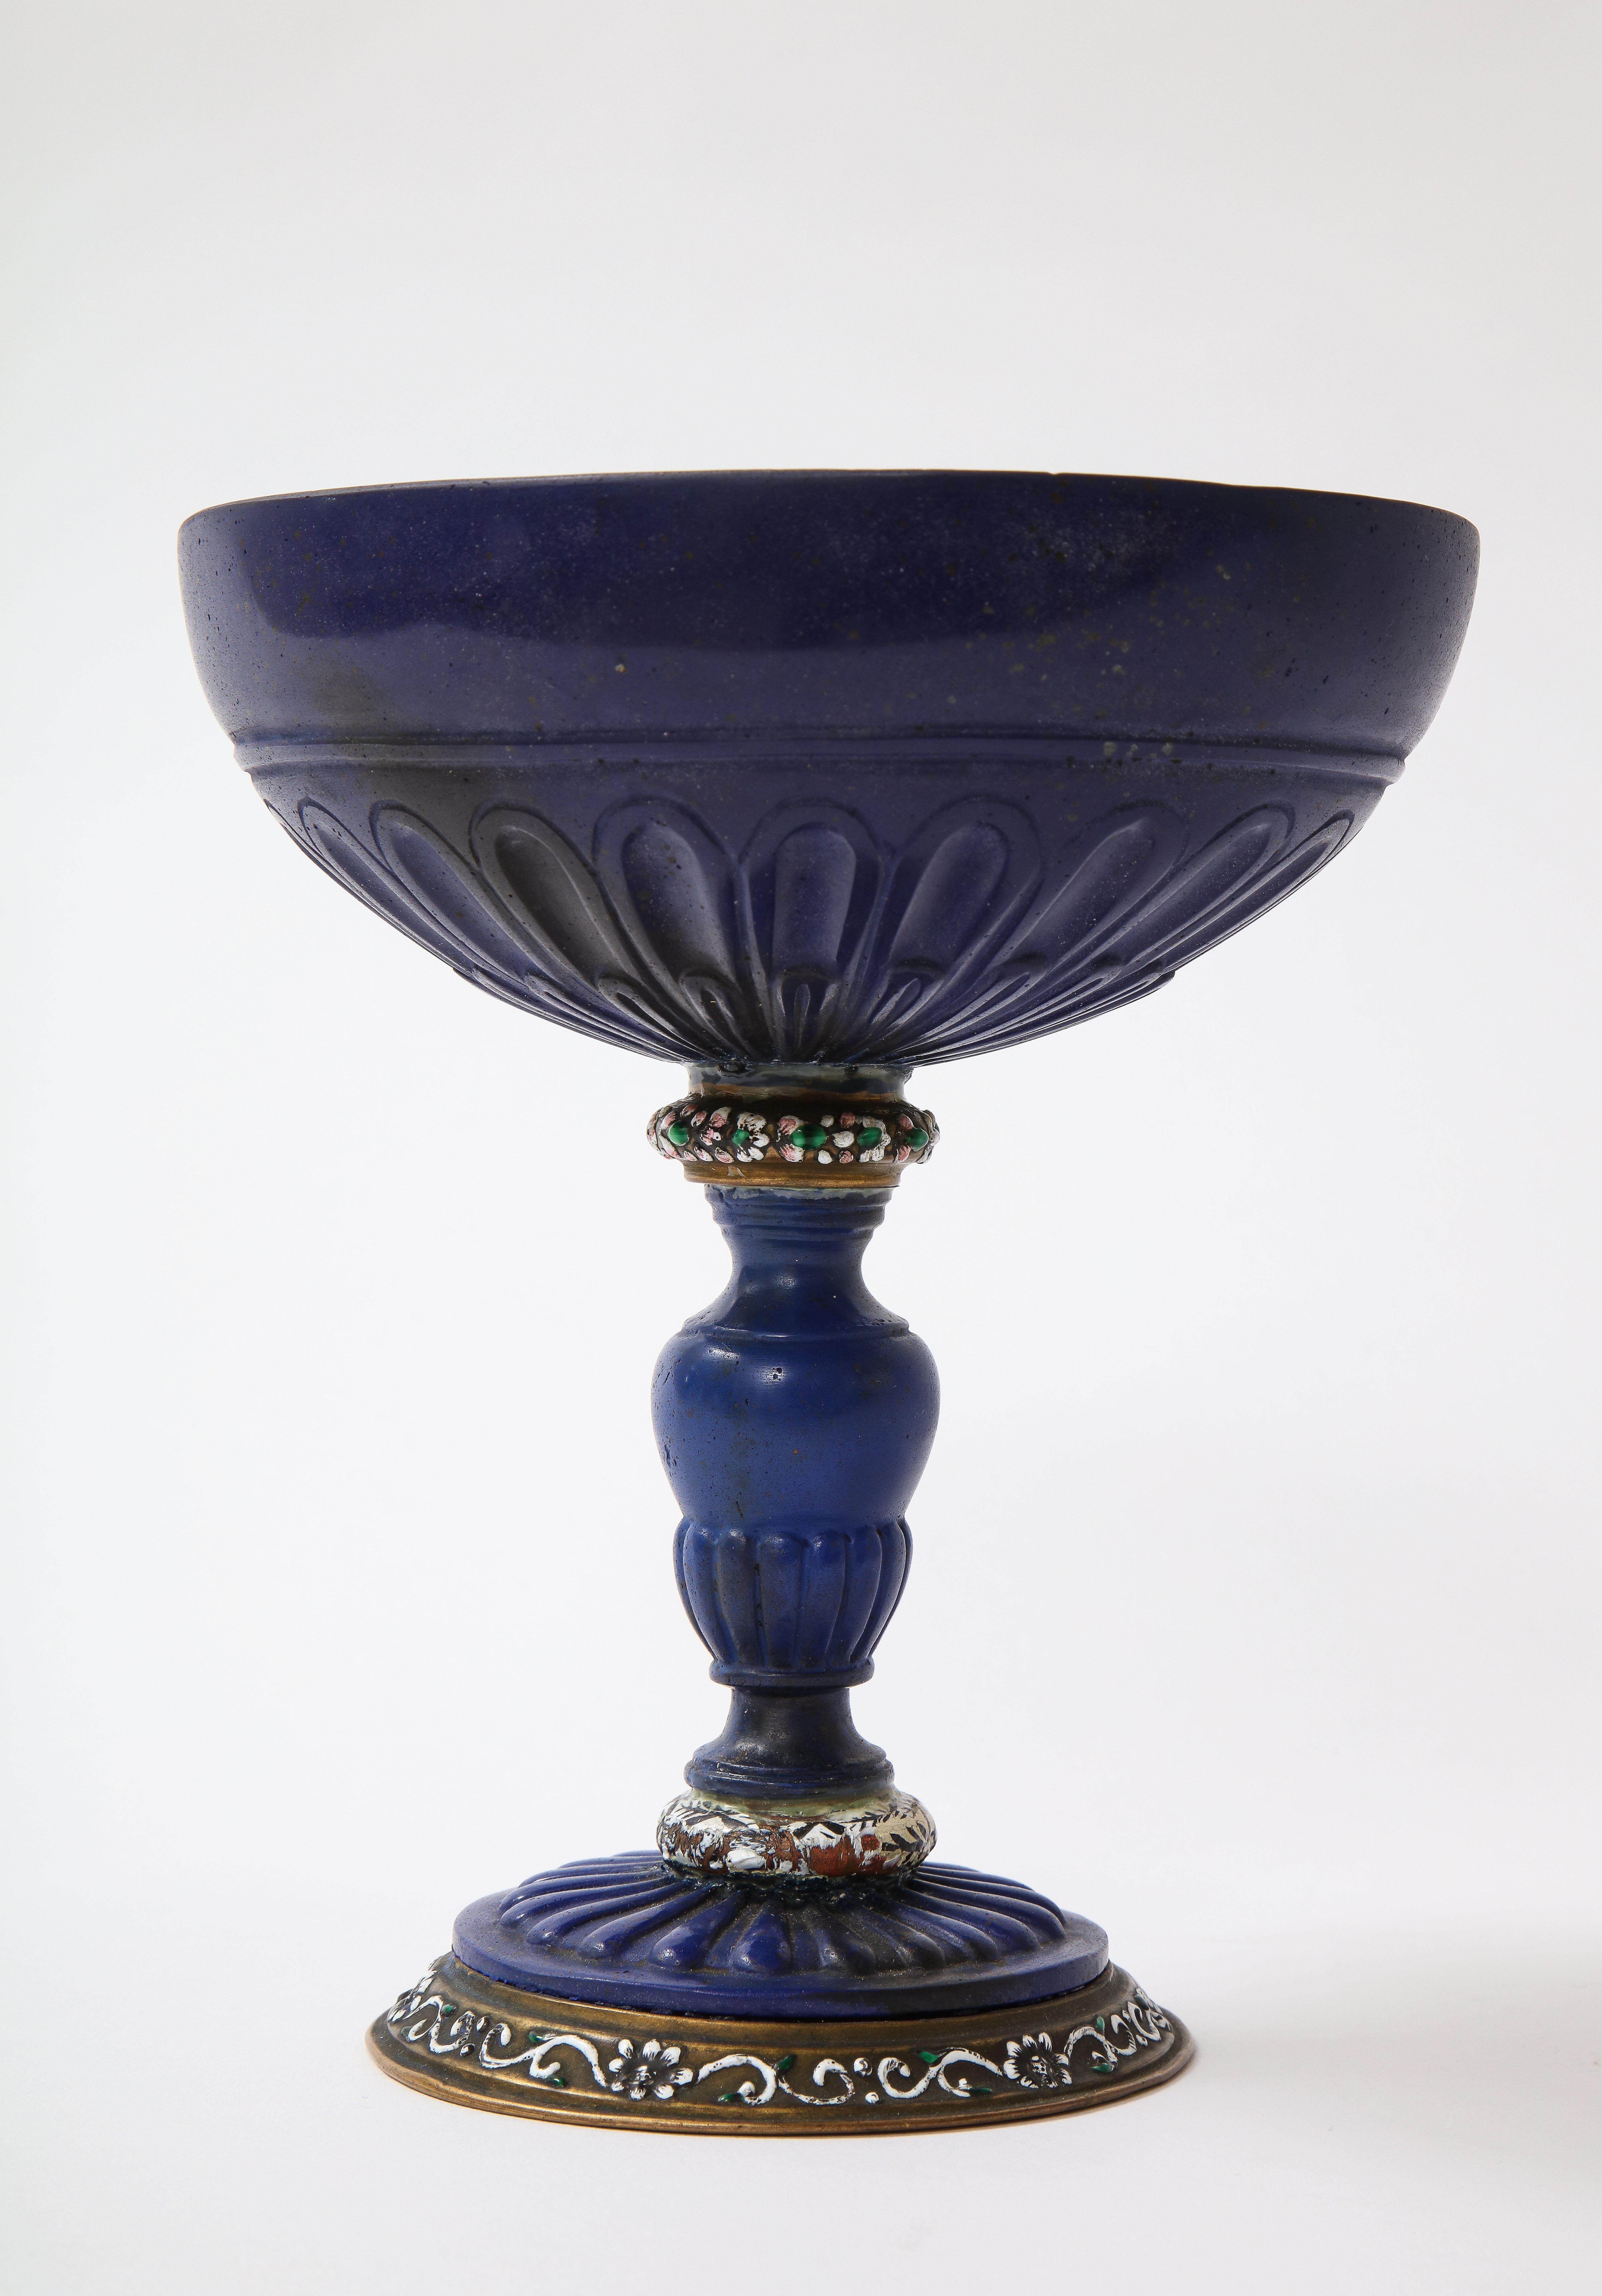 A Magnificent 19th Century Italian Dore Bronze Mounted Champlevé Enamel and Lapis Lazuli Coupe. This remarkable creation stands as a testament to impeccable artistry, as showcased by the intricate detailing that embellishes this extraordinary